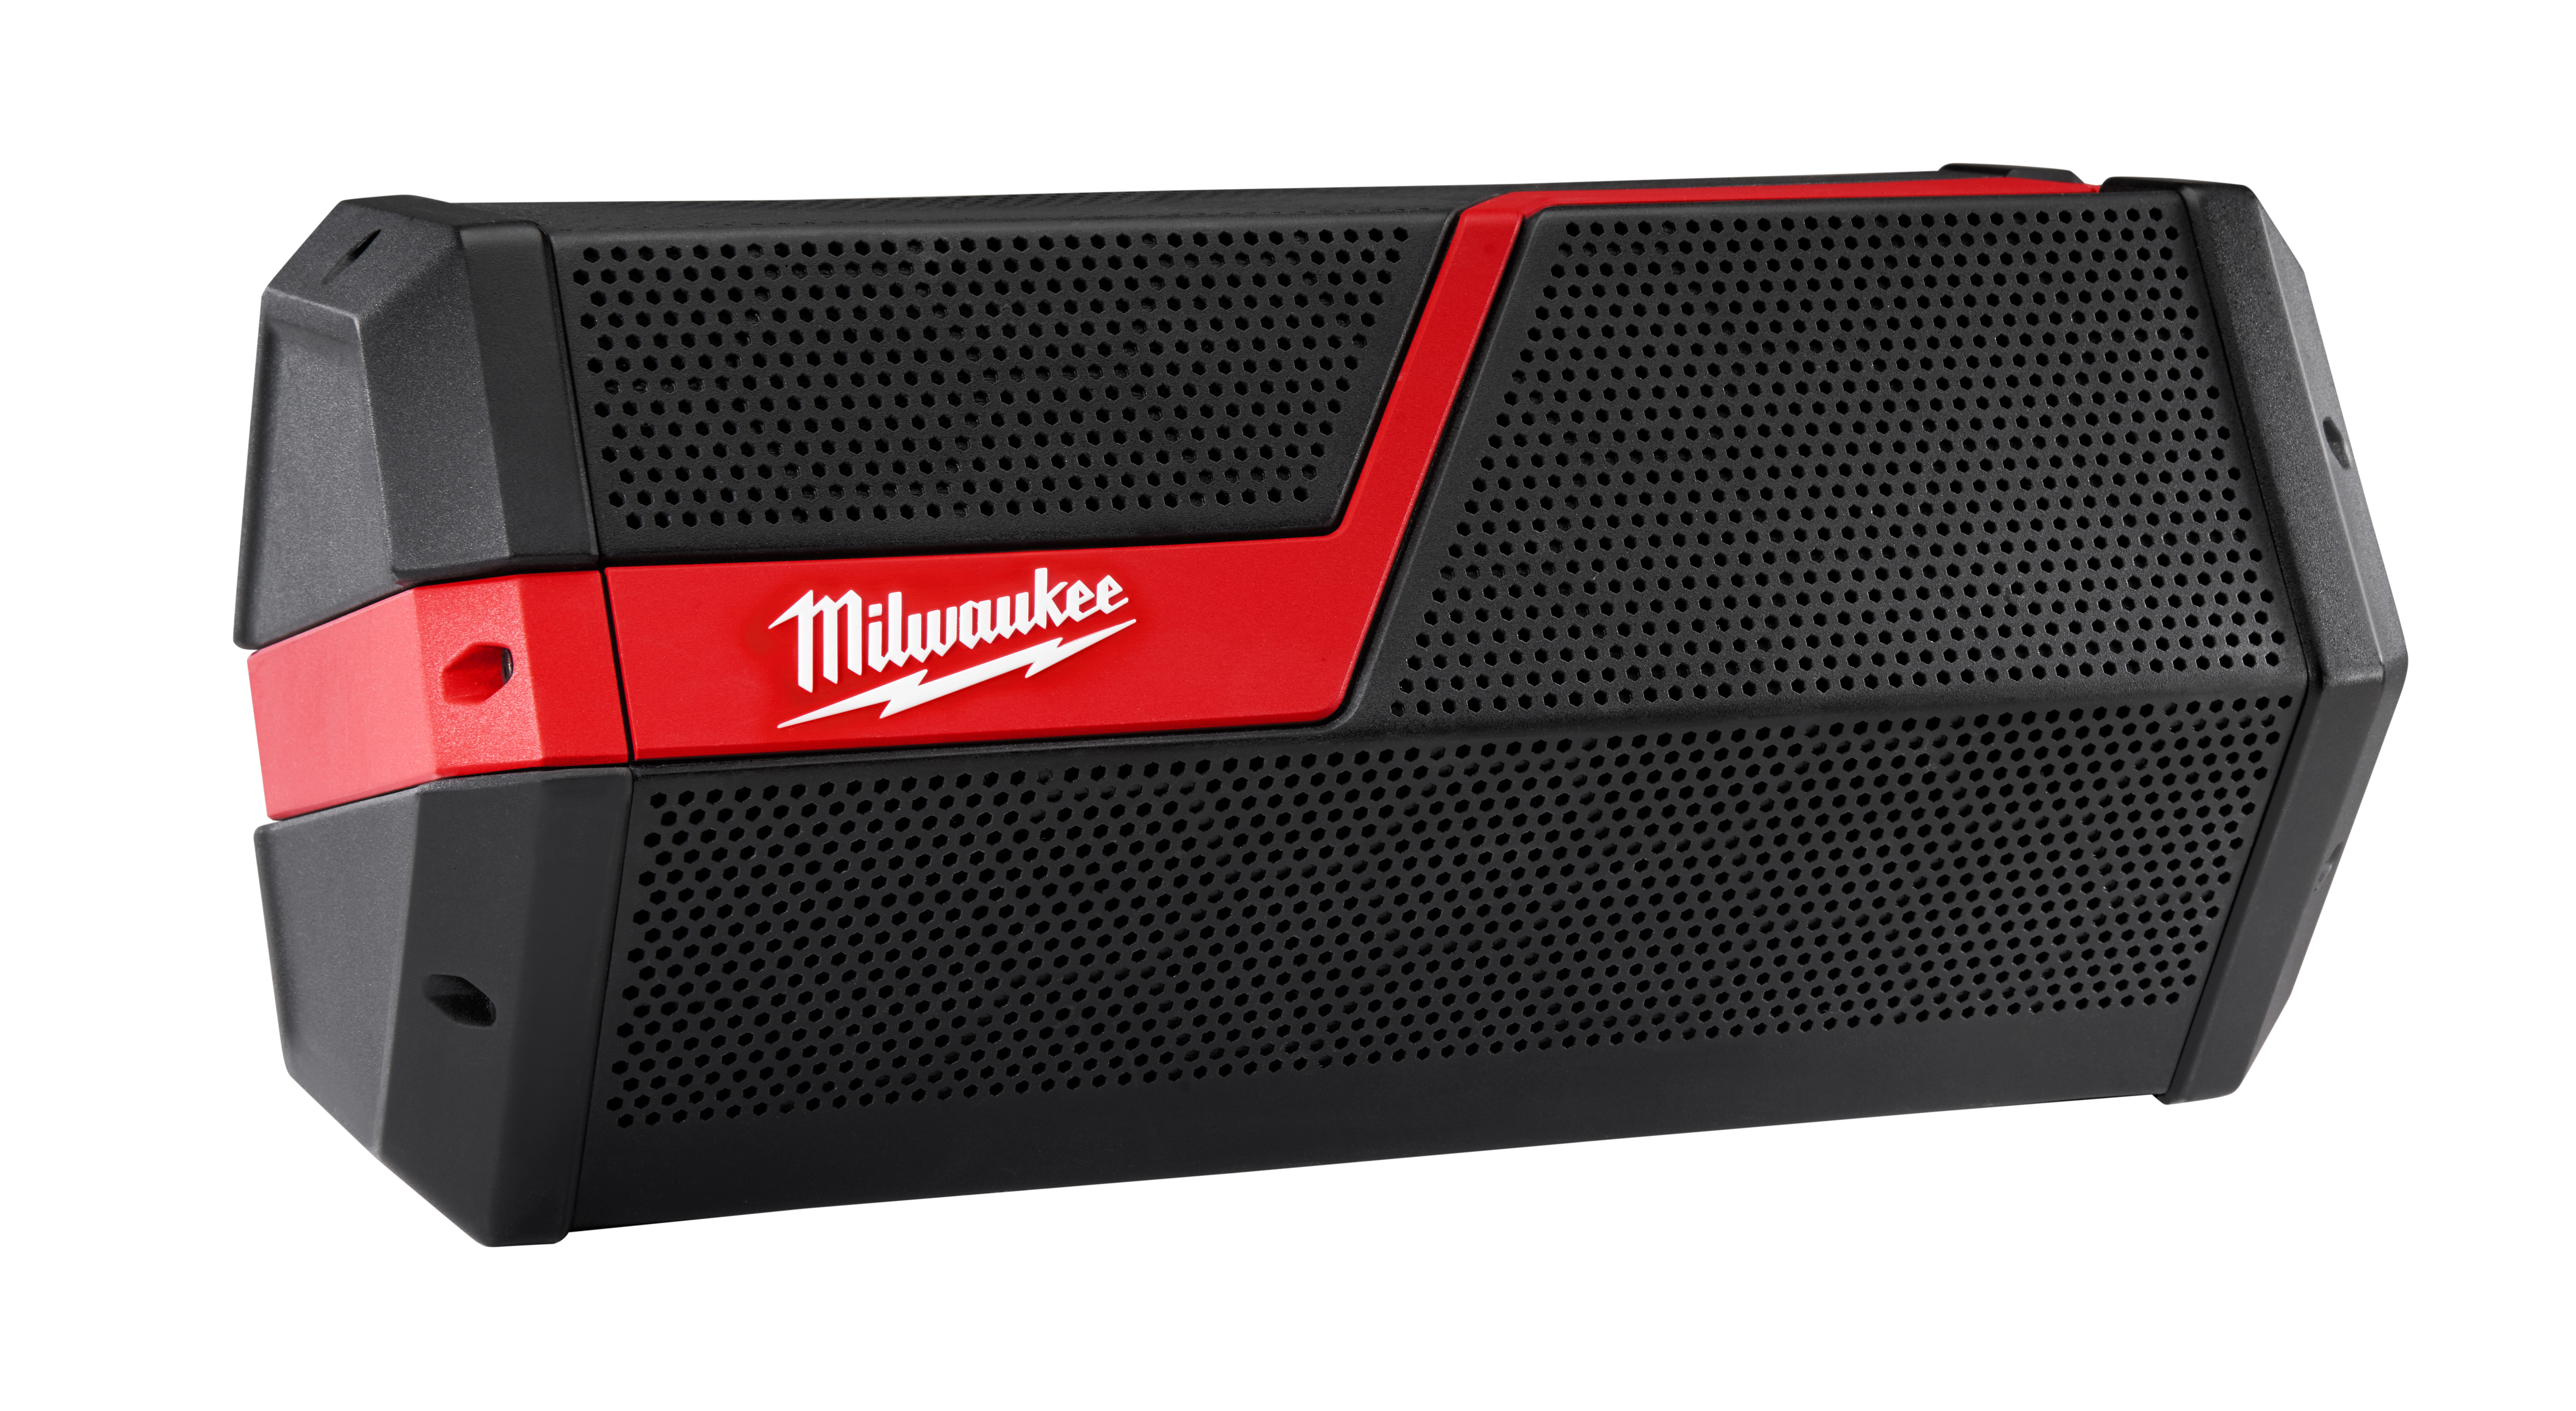 The Milwaukee M18™/M12™ wireless jobsite speaker delivers the loudest and clearest sound on or off the jobsite. The premium six speaker design provides unmatched clarity of sound with booming bass, clear mids, and sharp highs. Paired with a 40 W dual channel digital amplifier, the speaker produces big sound to fill any room or work environment. Nothing but heavy duty construction features impact resistant side caps and a reinforced honeycomb grill to withstand drops and abuse. The latest Bluetooth® technology ensures easy pairing with a smart phone, tablet, or other mobile device from up to 100 ft away. Compatible with all M18™ and M12™ batteries or able to run off of AC power, the M18™/M12™ wireless jobsite speaker maximizes versatility, functionality, and performance to set a new standard in high-definition jobsite sound.